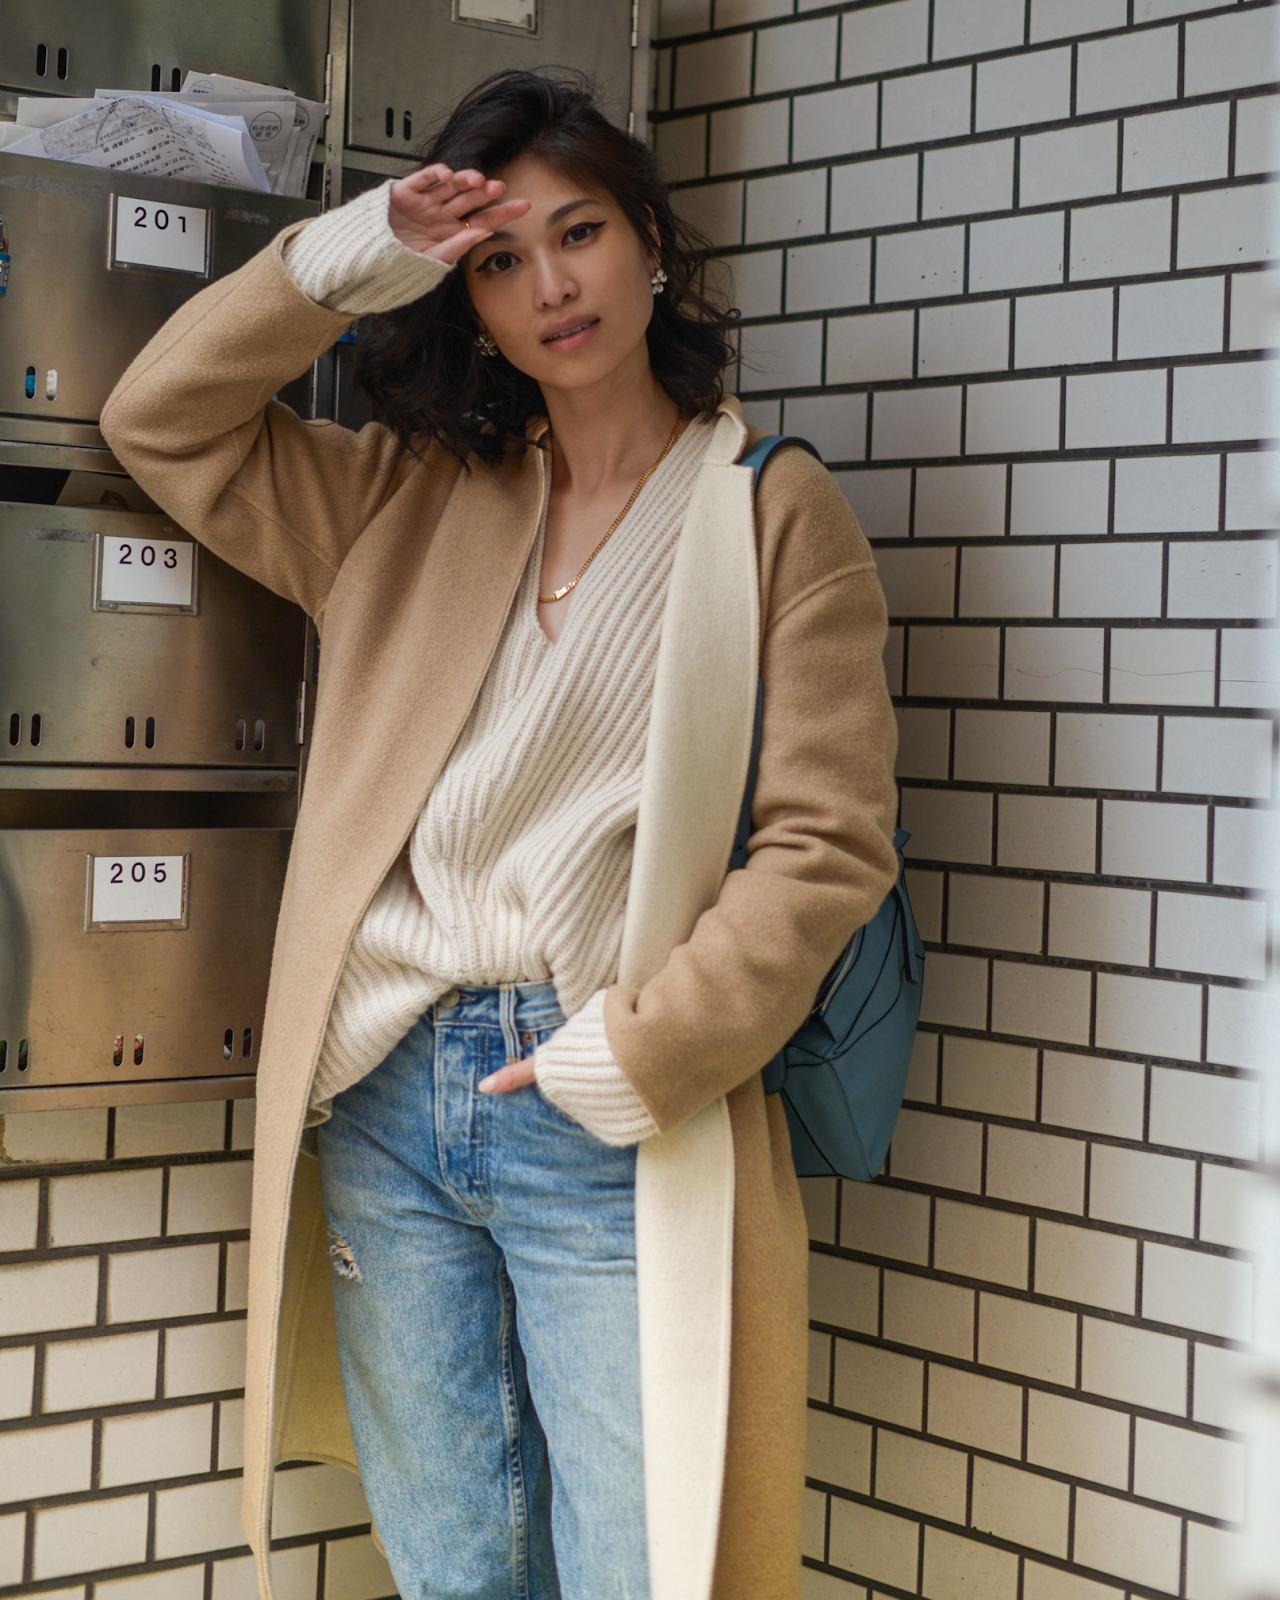 Camel and beige coat outfit, Loewe Puzzle Bag in stone blue, simple outfits in Daikanyama, Tokyo streetstyle, New York personal style blogger - Press to Resume / 012019 - FOREVERVANNY.com